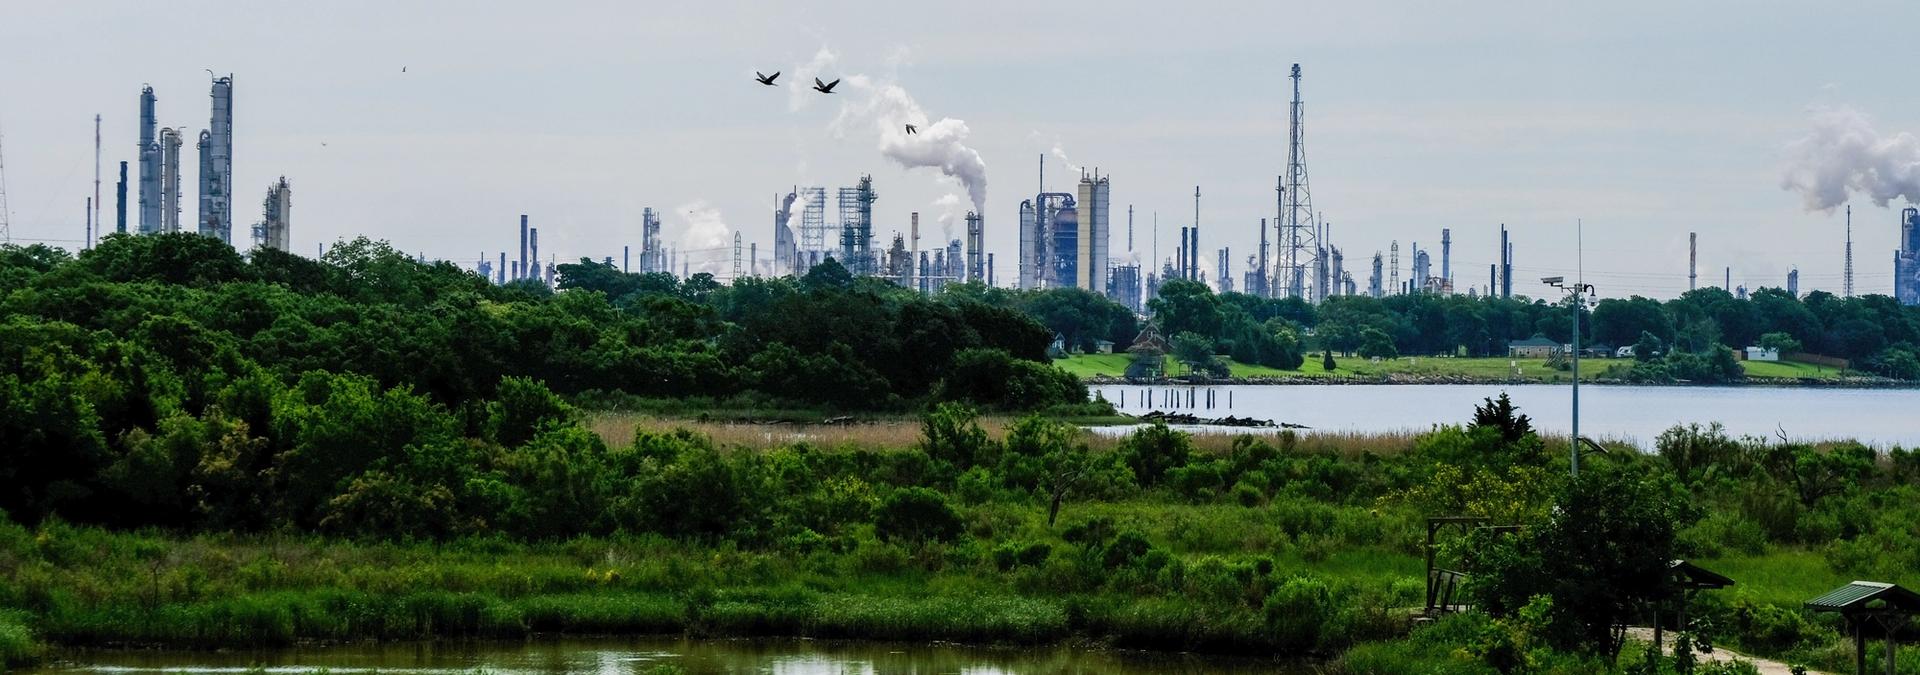 Some of the worst polluters of benzene in the U.S. are located in Texas, including ExxonMobil's Baytown refinery.